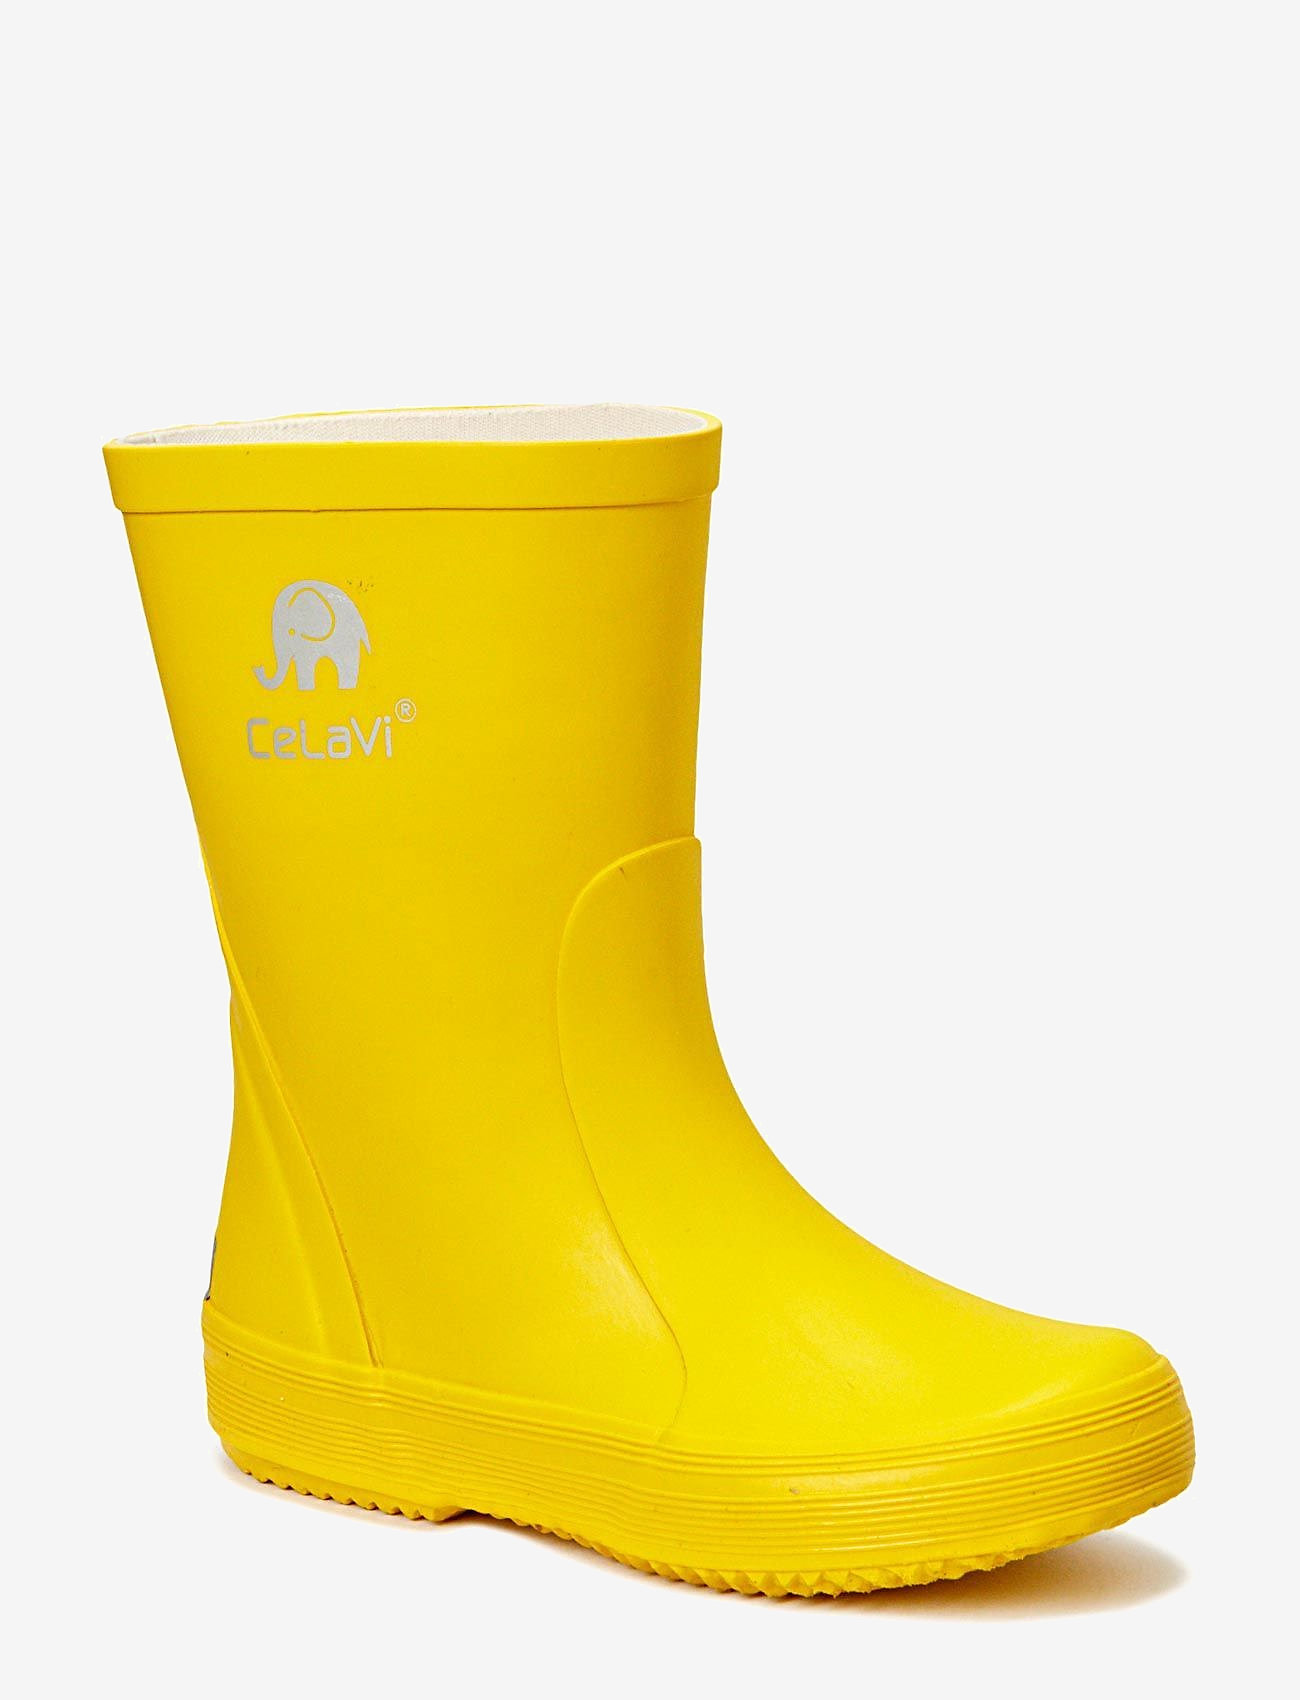 CeLaVi - Basic wellies -solid - unlined rubberboots - yellow - 0